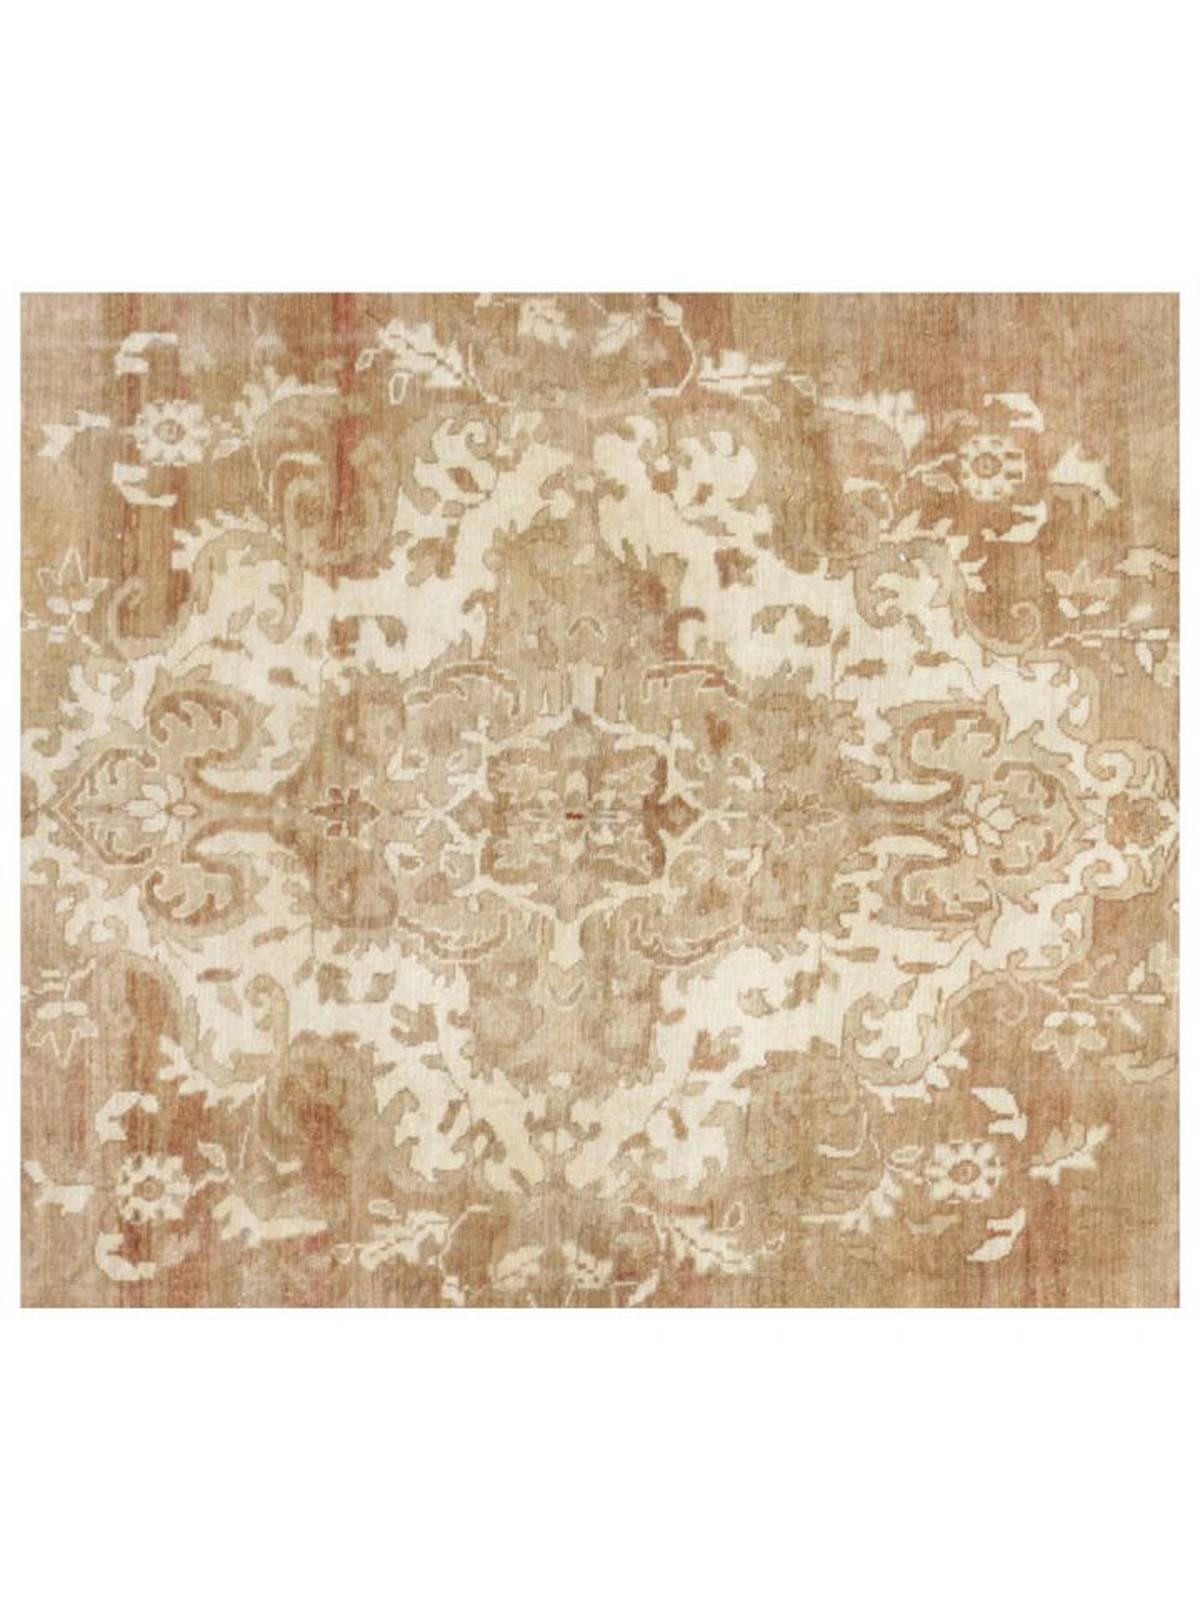 The central medallion in is incased in a visually strong border, enhancing the overall glamorous look of this hand made Oushak rug. Beige with ivory, umber, deep rose pink and sky blue. In very good vintage condition.